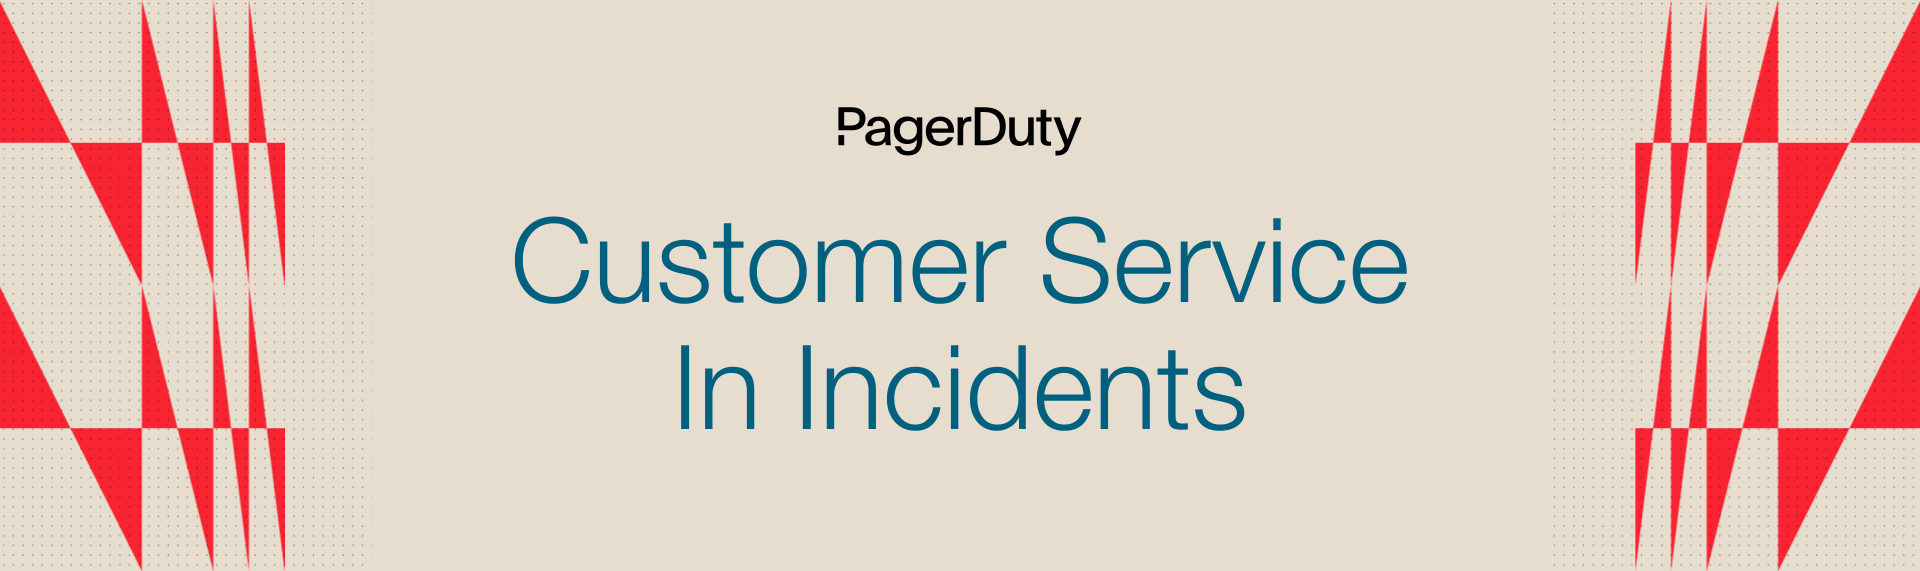 Customer Service Role in Incidents